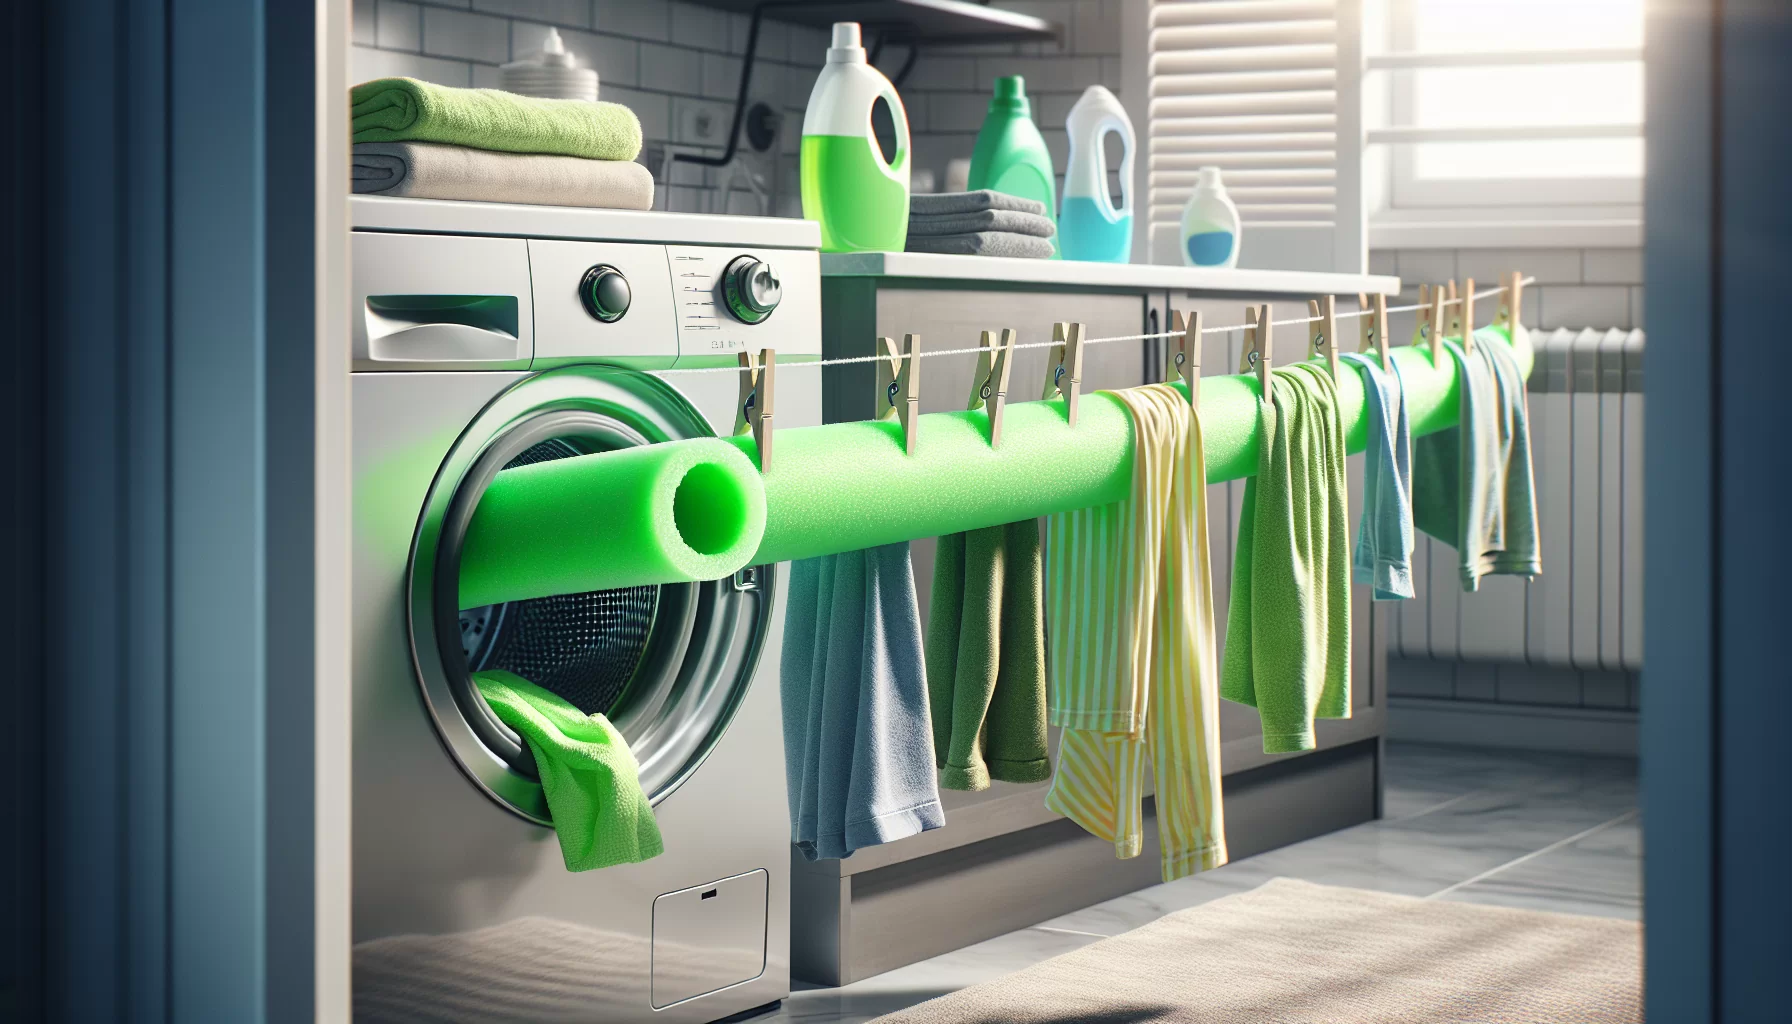 Revolutionize your laundry with the eco-friendly pool noodle hack